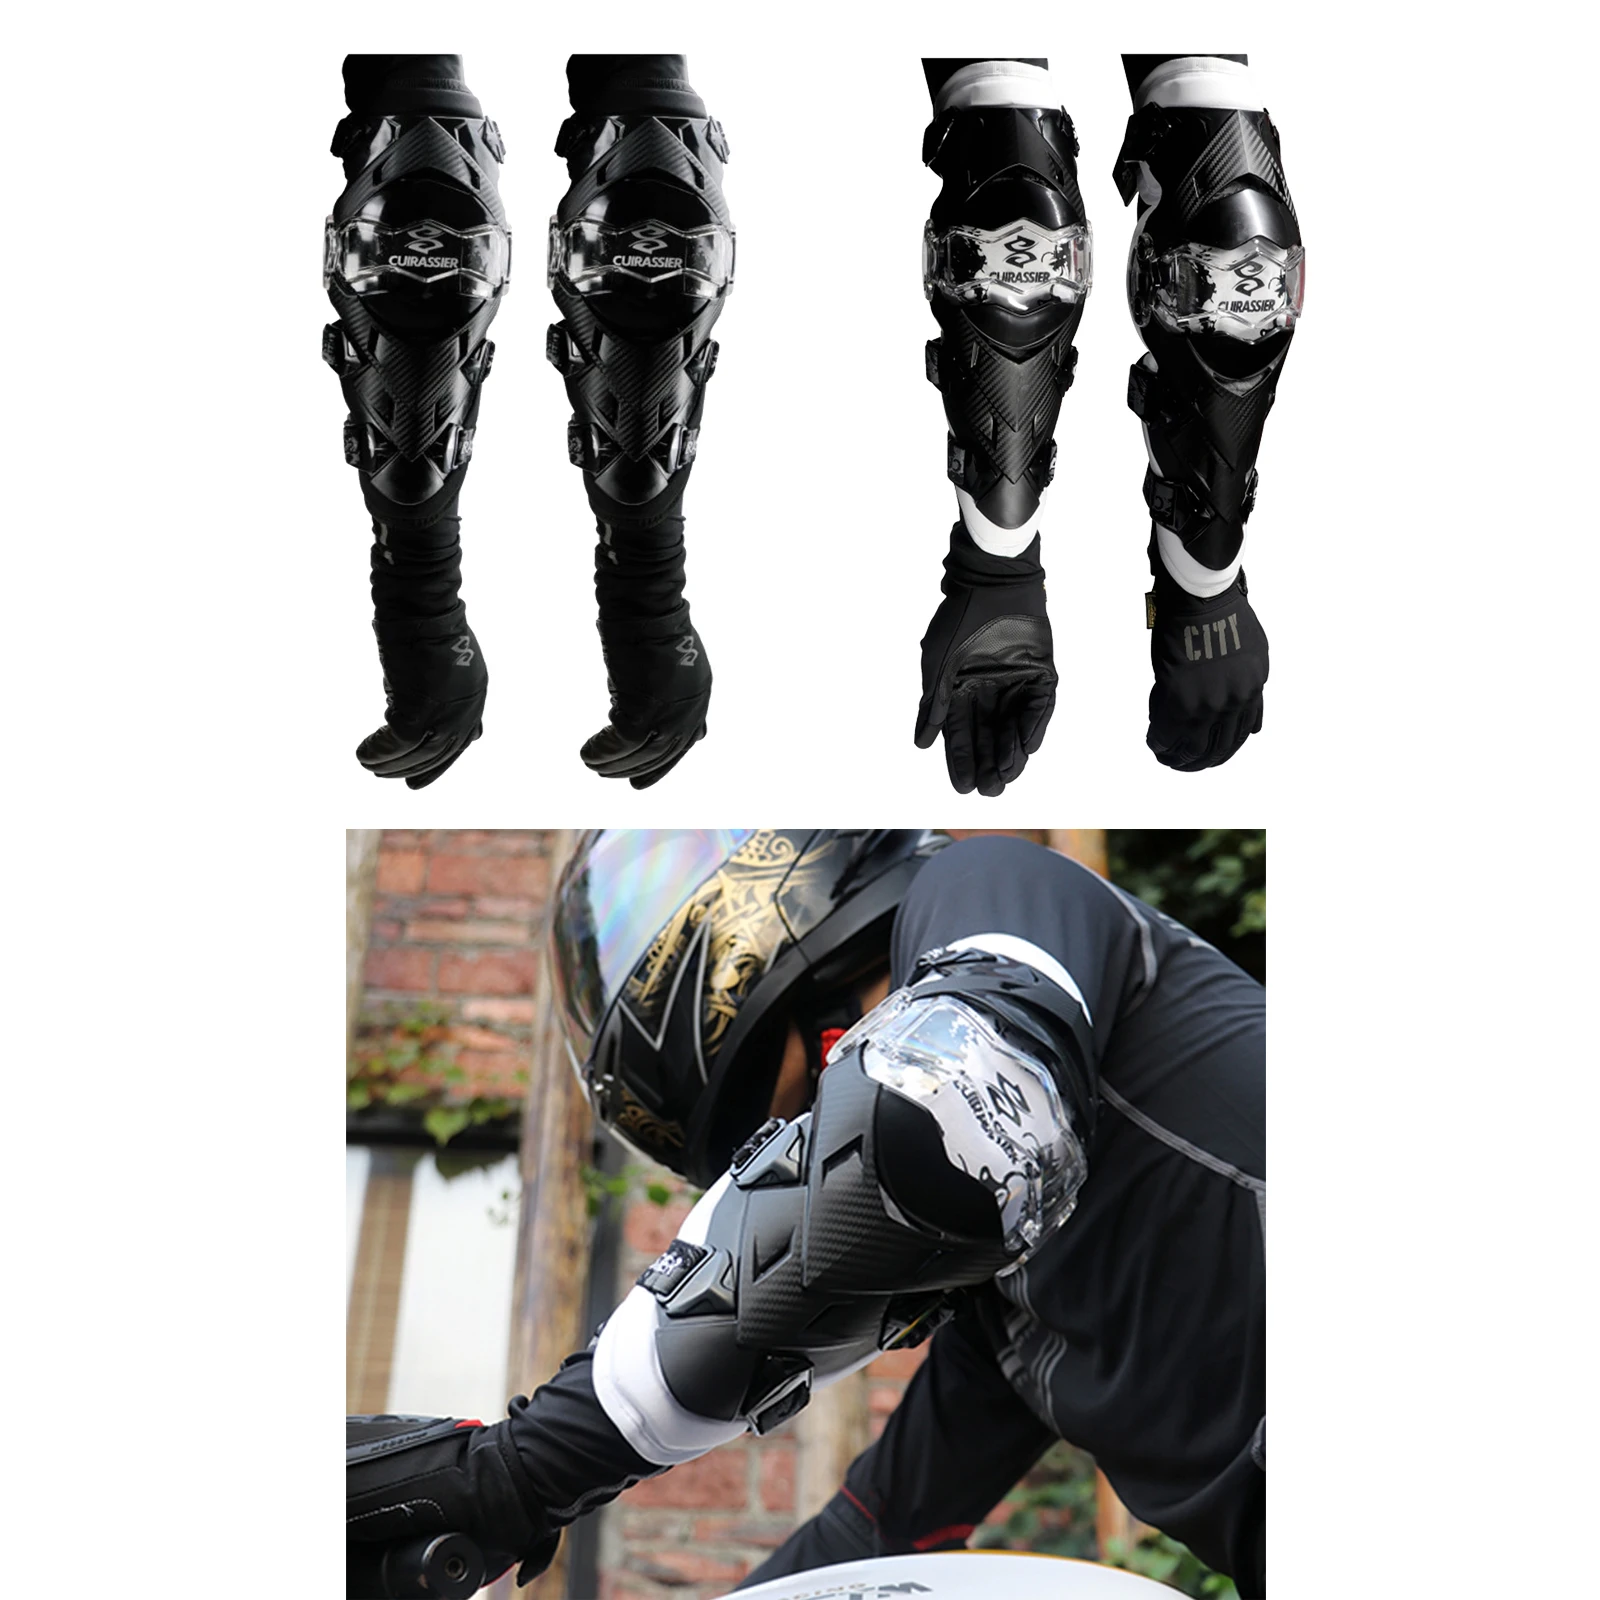 Cuirassier Elbow Pads E09 Motocross Protection Motorcycle MTB Off-Road Elbow